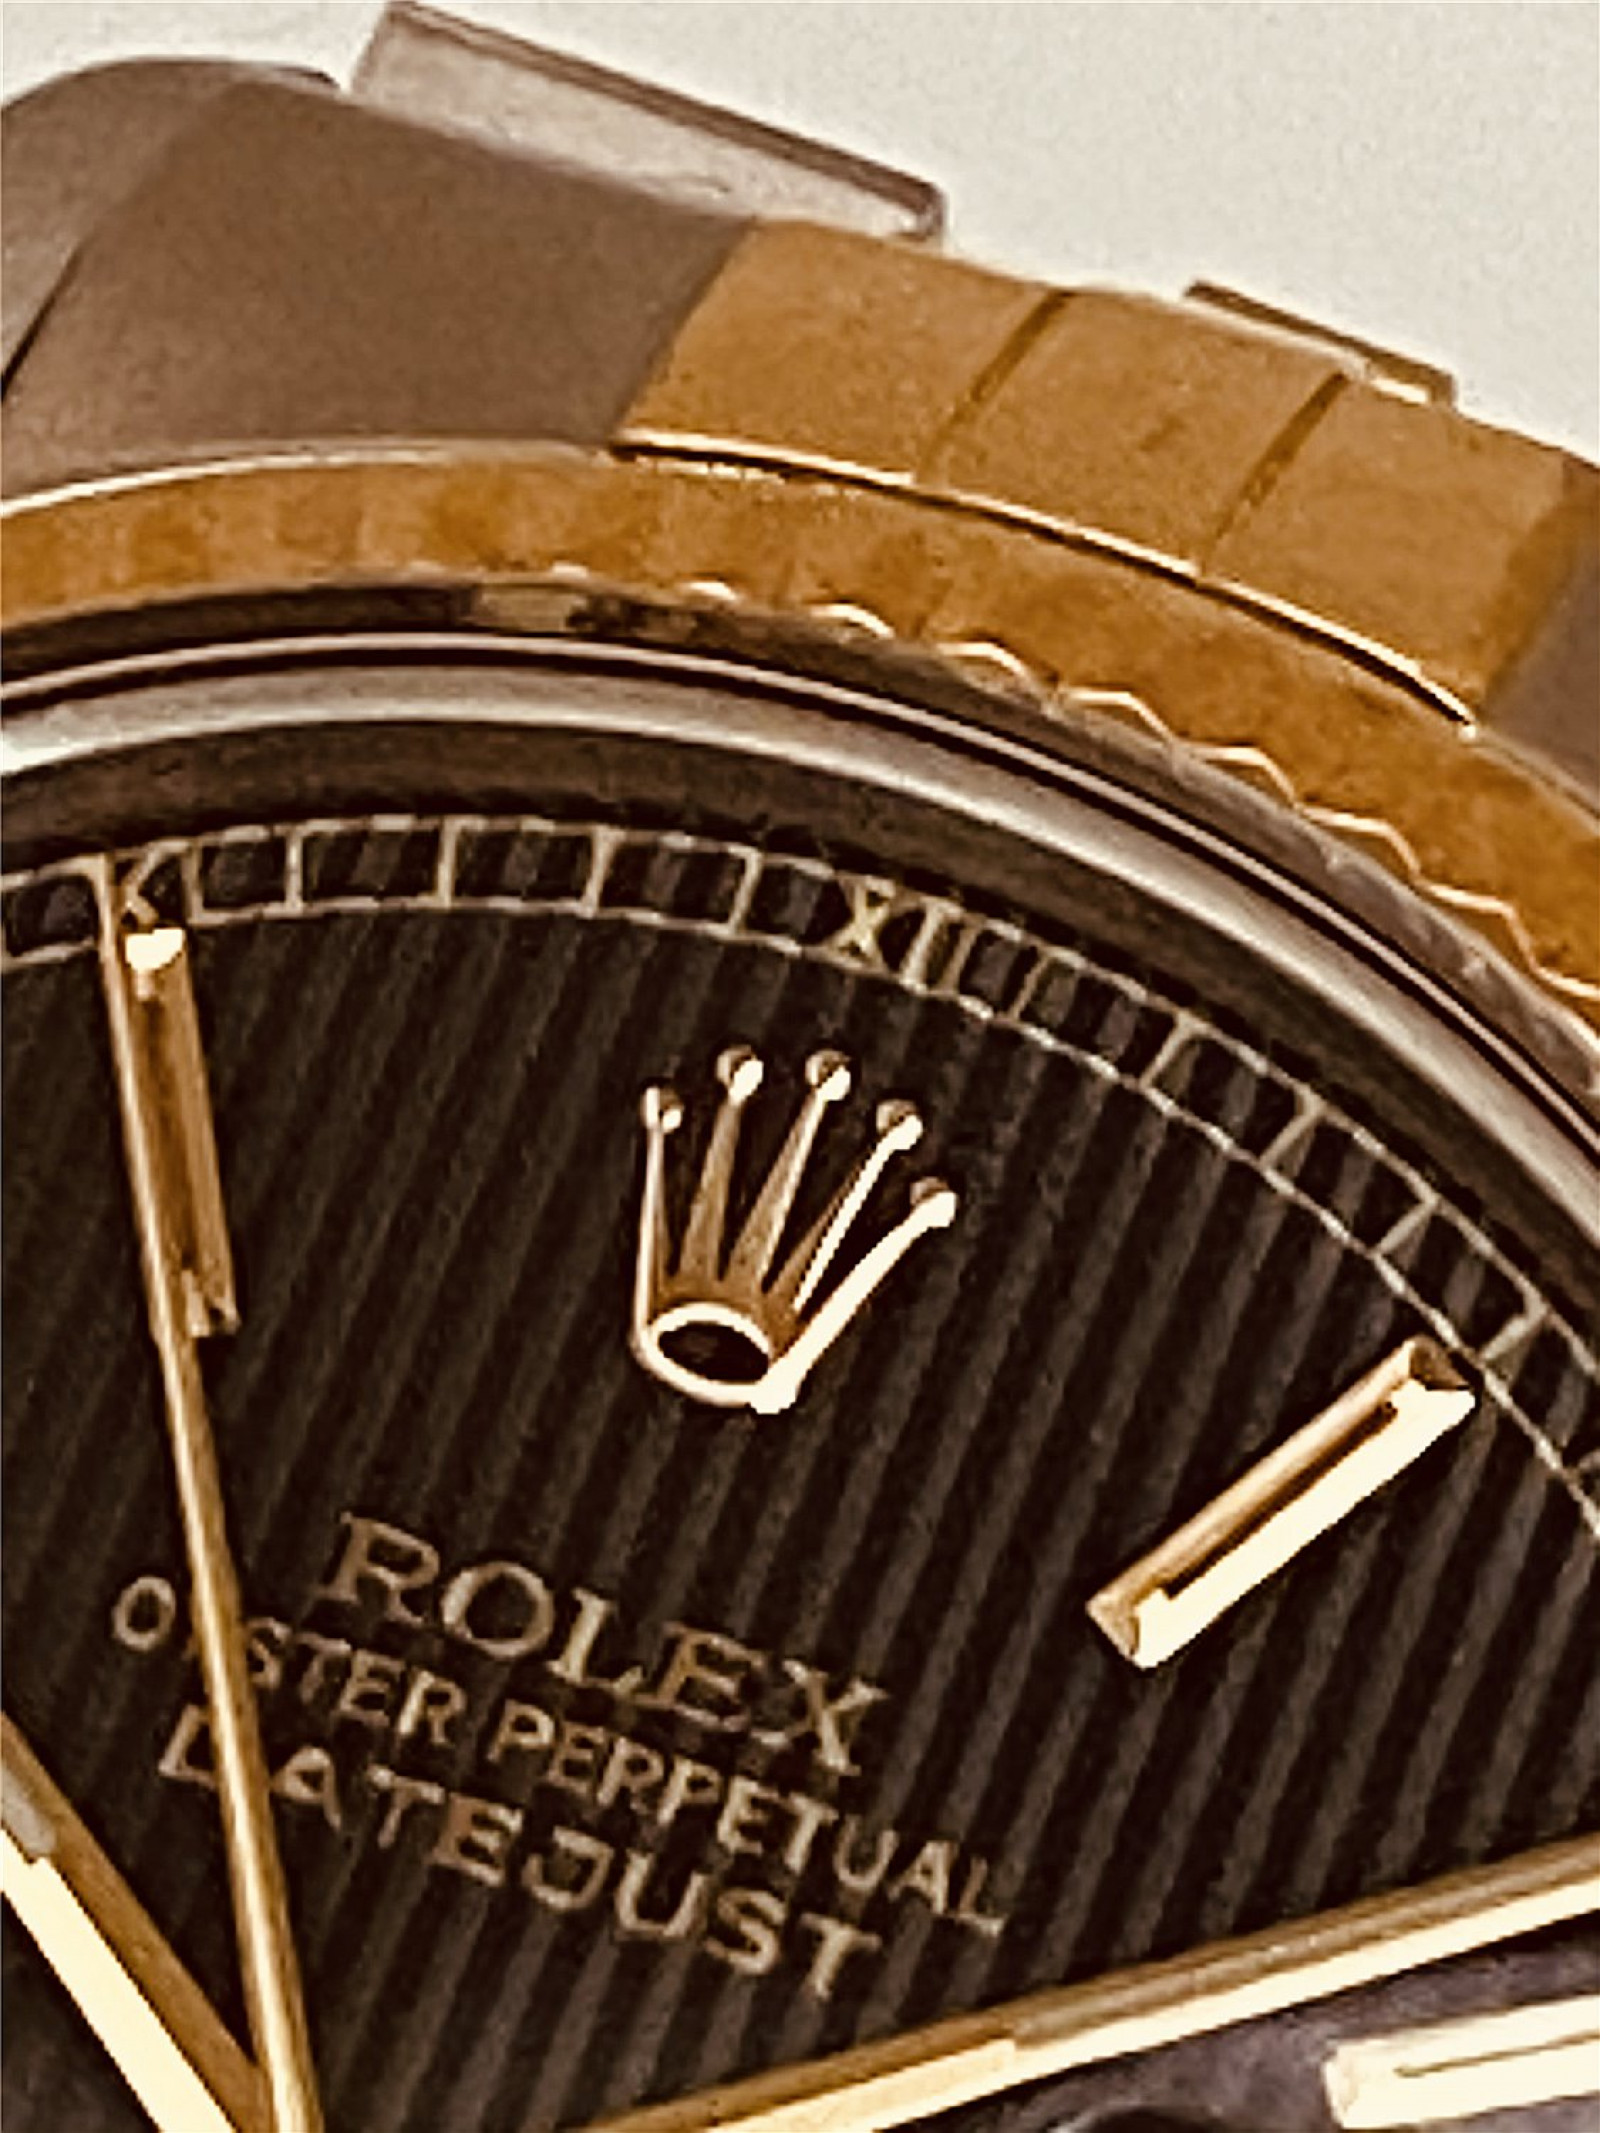 Rolex Datejust Ref. 16013 with Tapestry Dial